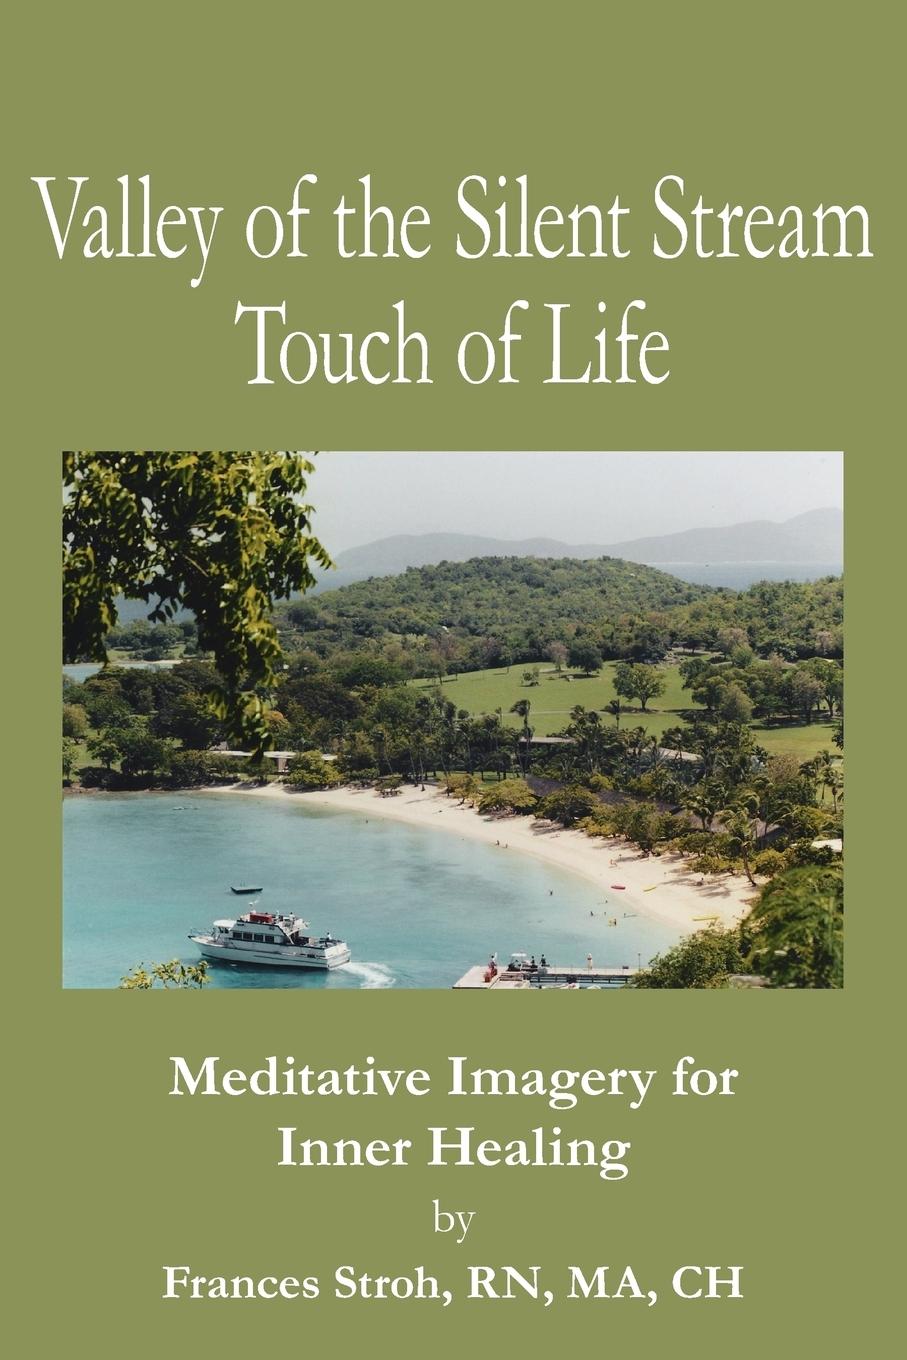 Valley of the Silent Stream Touch of Life - Stroh, Frances. RN MA CH